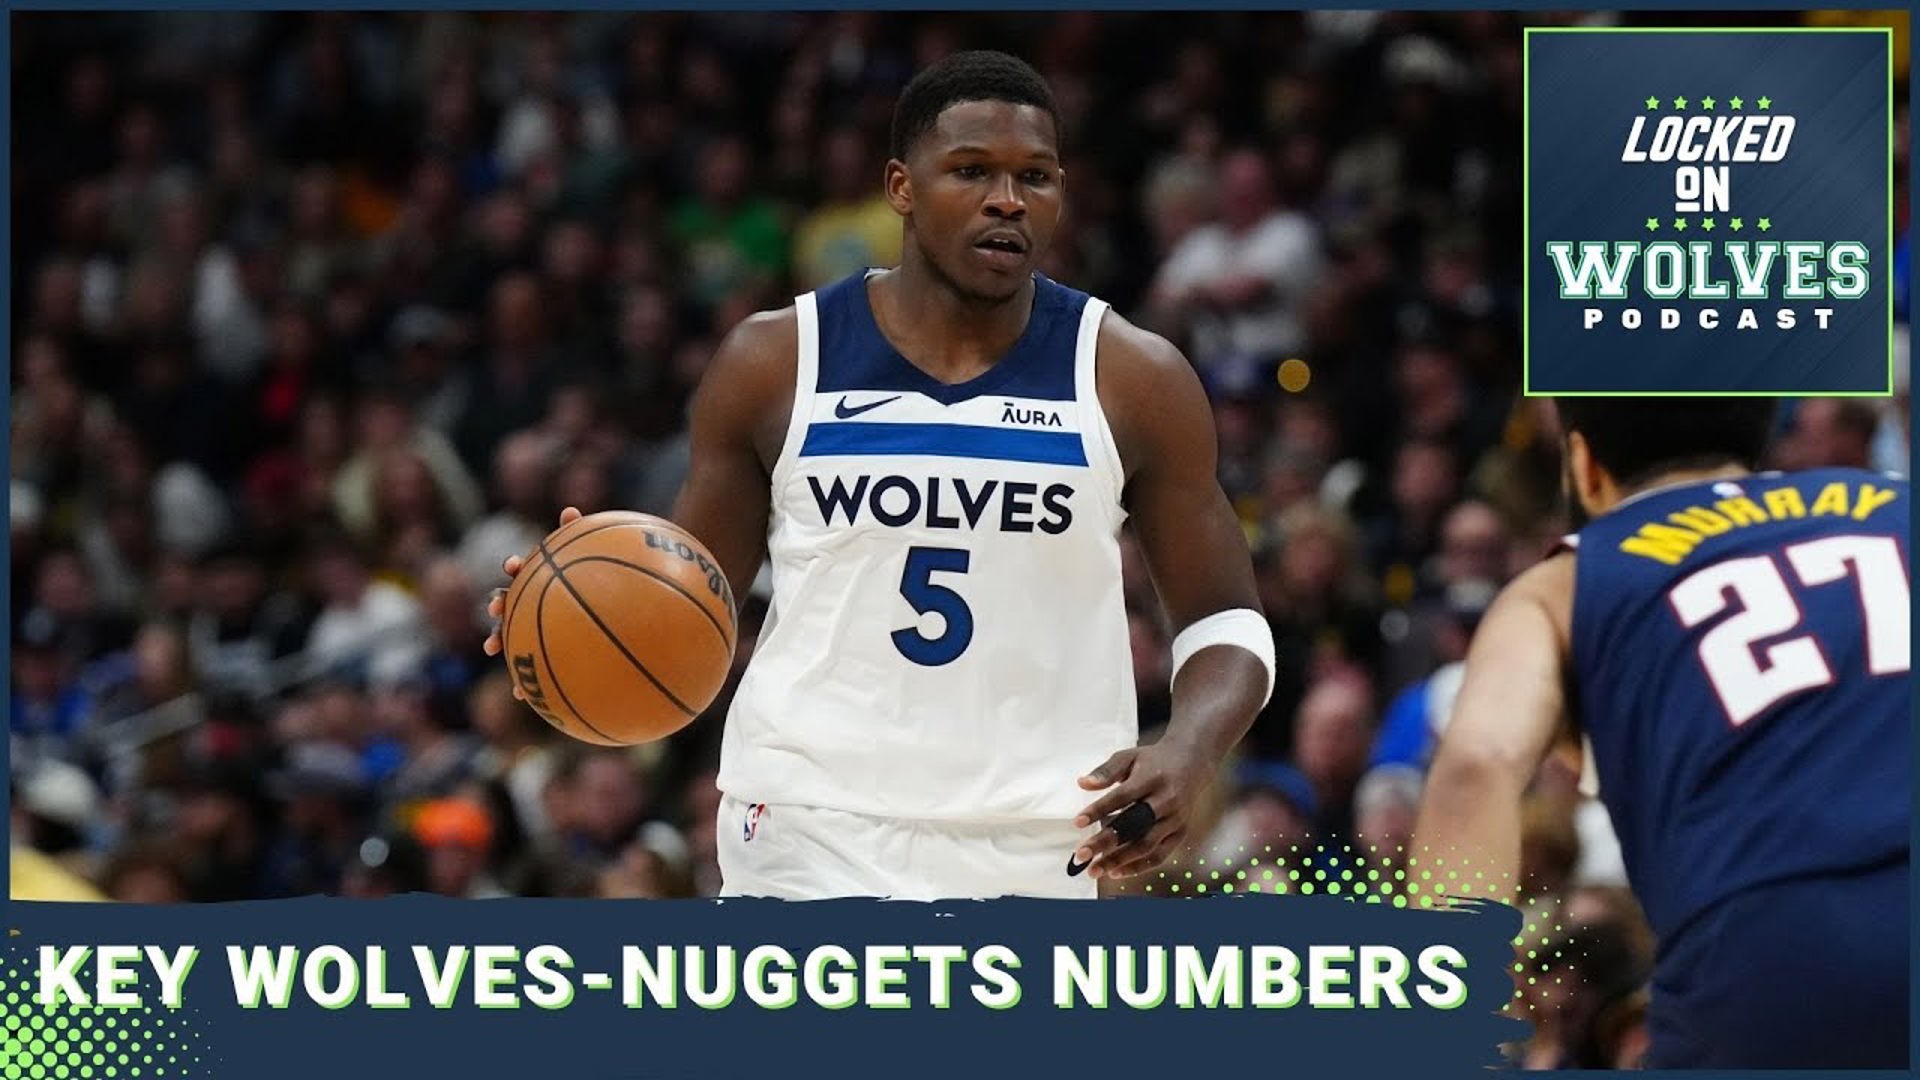 Minnesota Timberwolves vs. Denver Nuggets By the Numbers. Areas of focus for the Wolves